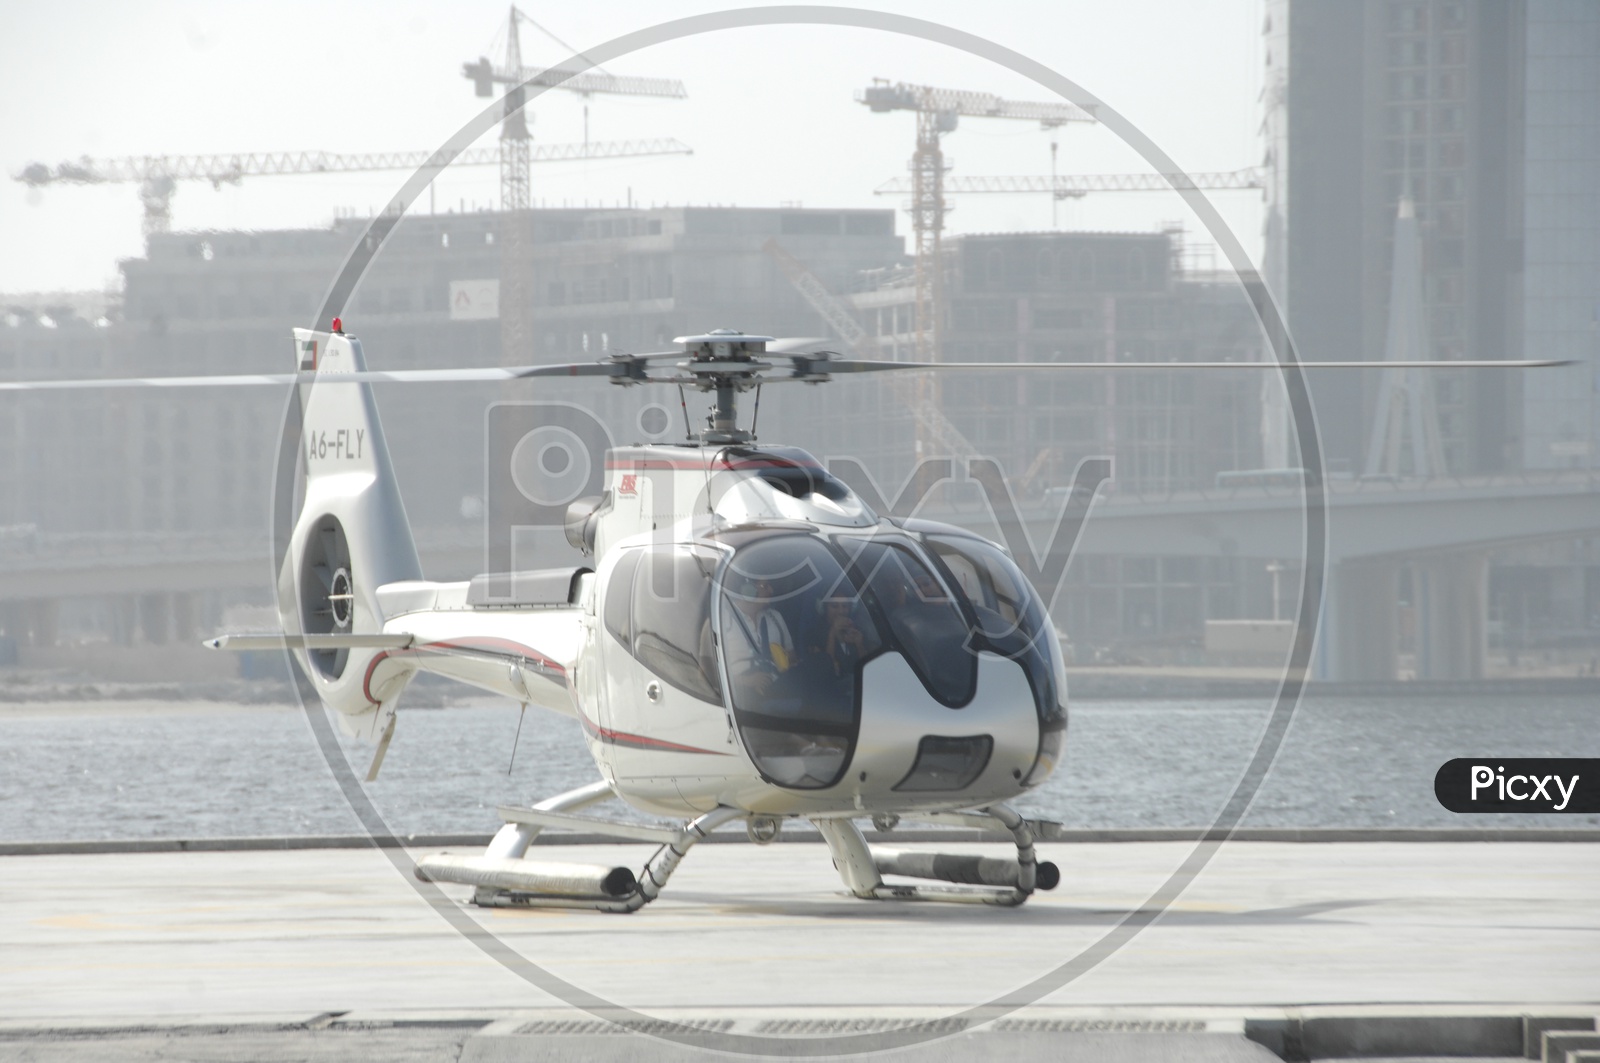 Helicopter/Aircraft on the building - Movie stills